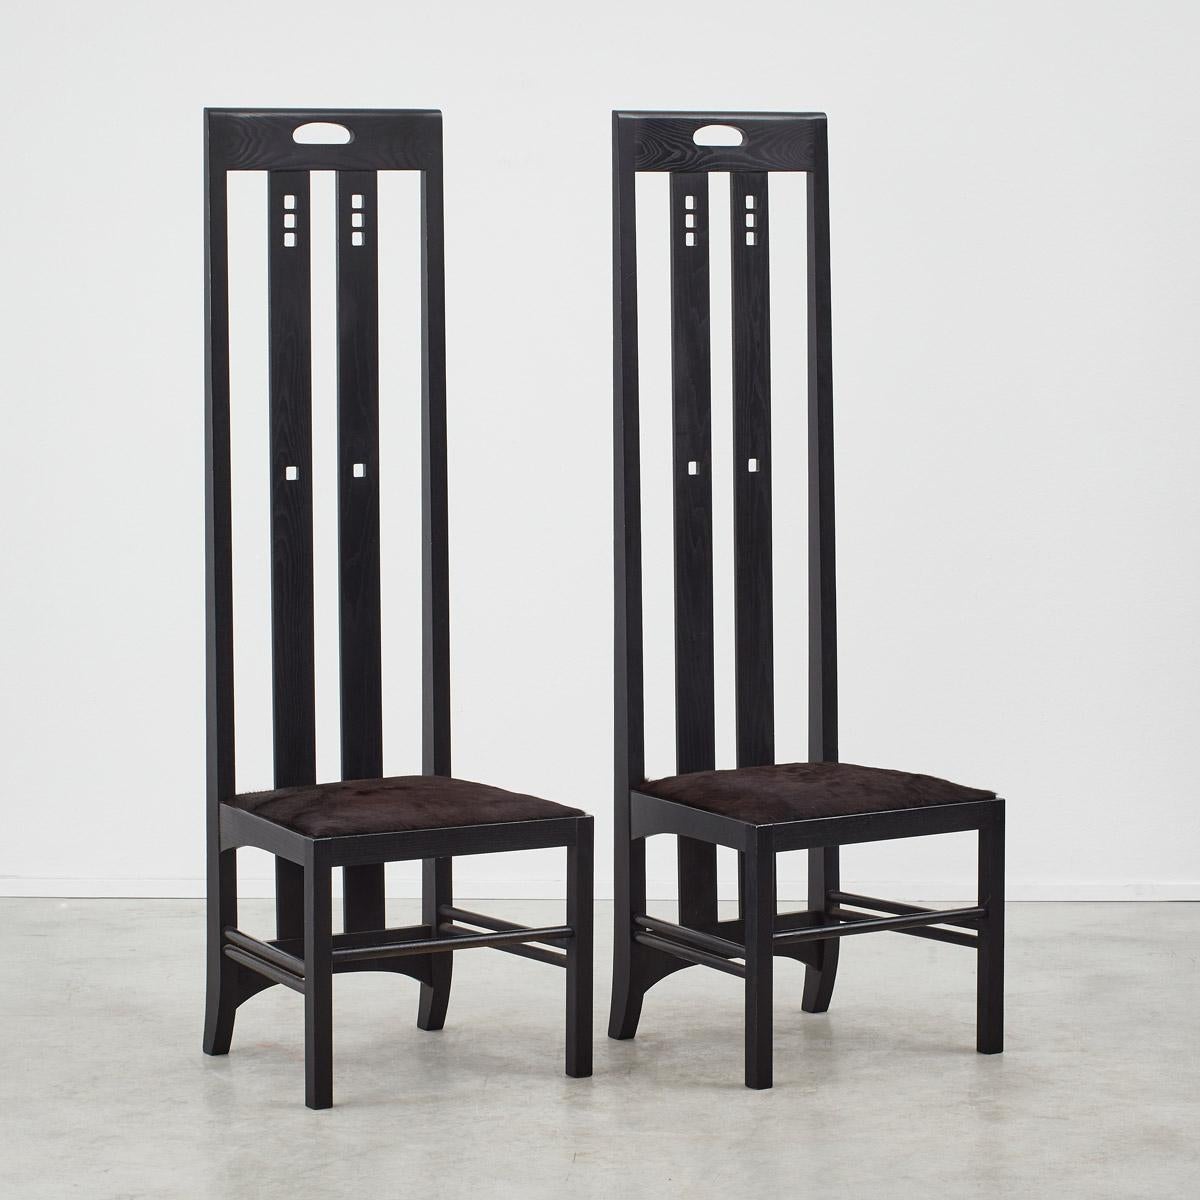 Wood Charles Rennie Mackintosh Ingram chairs for Cassina, Italy 1980s